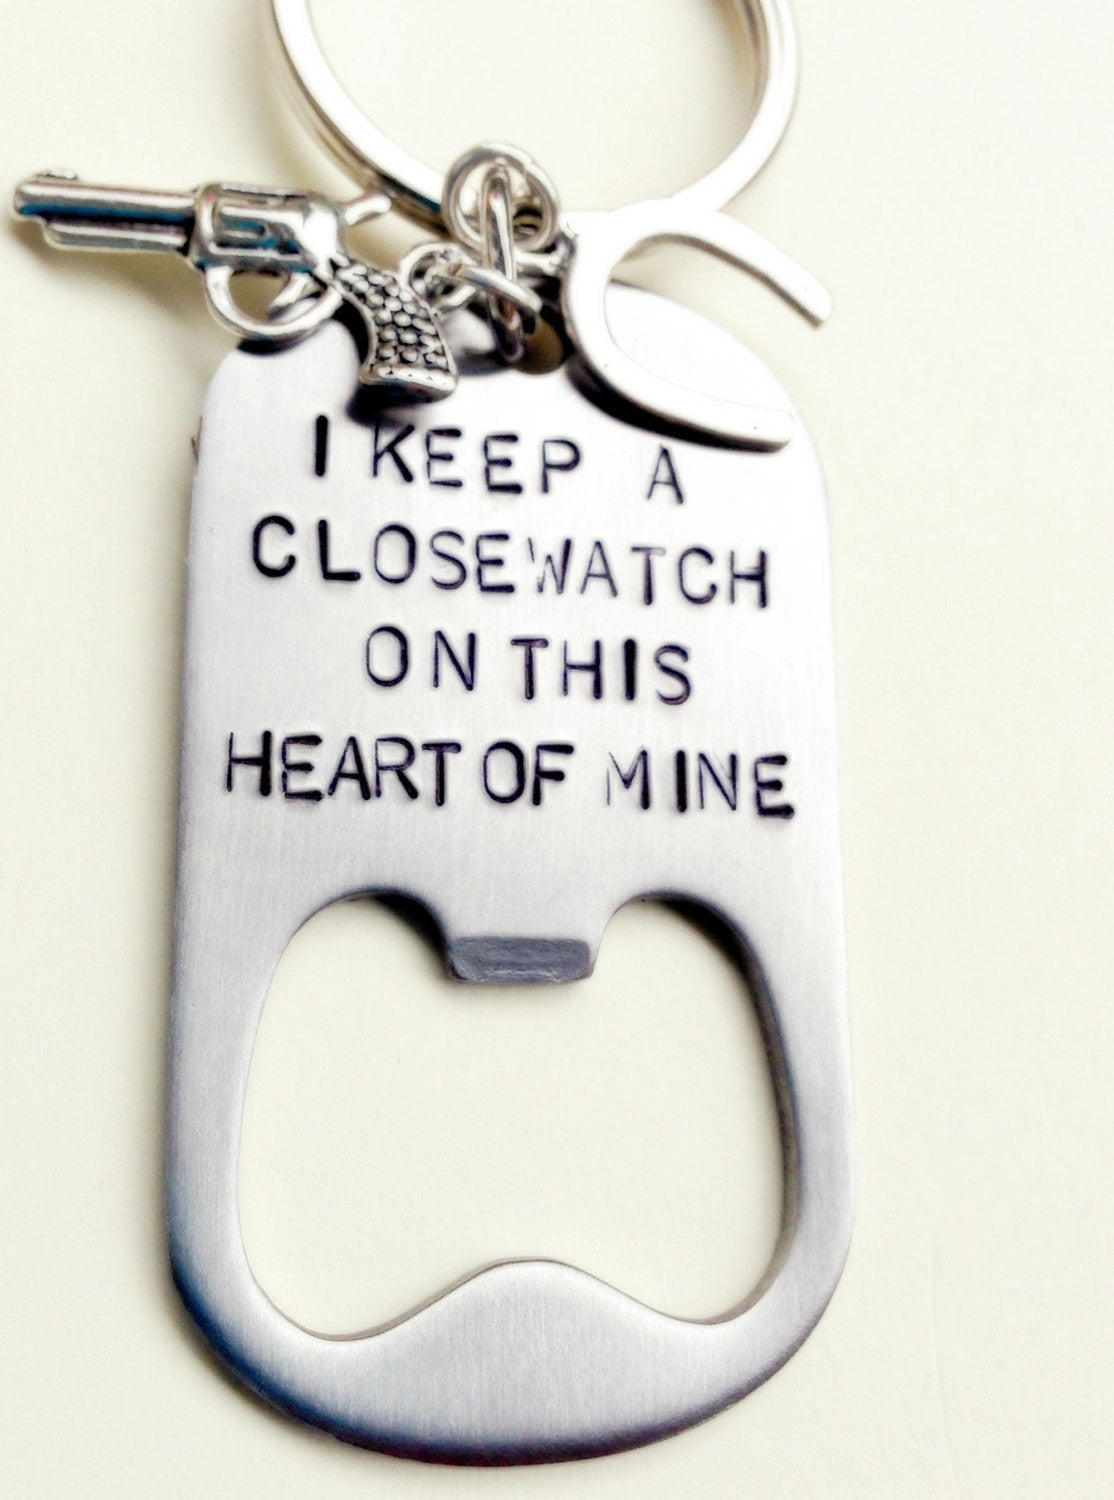 johnny cash, i keep a close watch on this heart of mine, bottle opener key chain,personalized key chains, gifts for men - Natashaaloha, jewelry, bracelets, necklace, keychains, fishing lures, gifts for men, charms, personalized, 